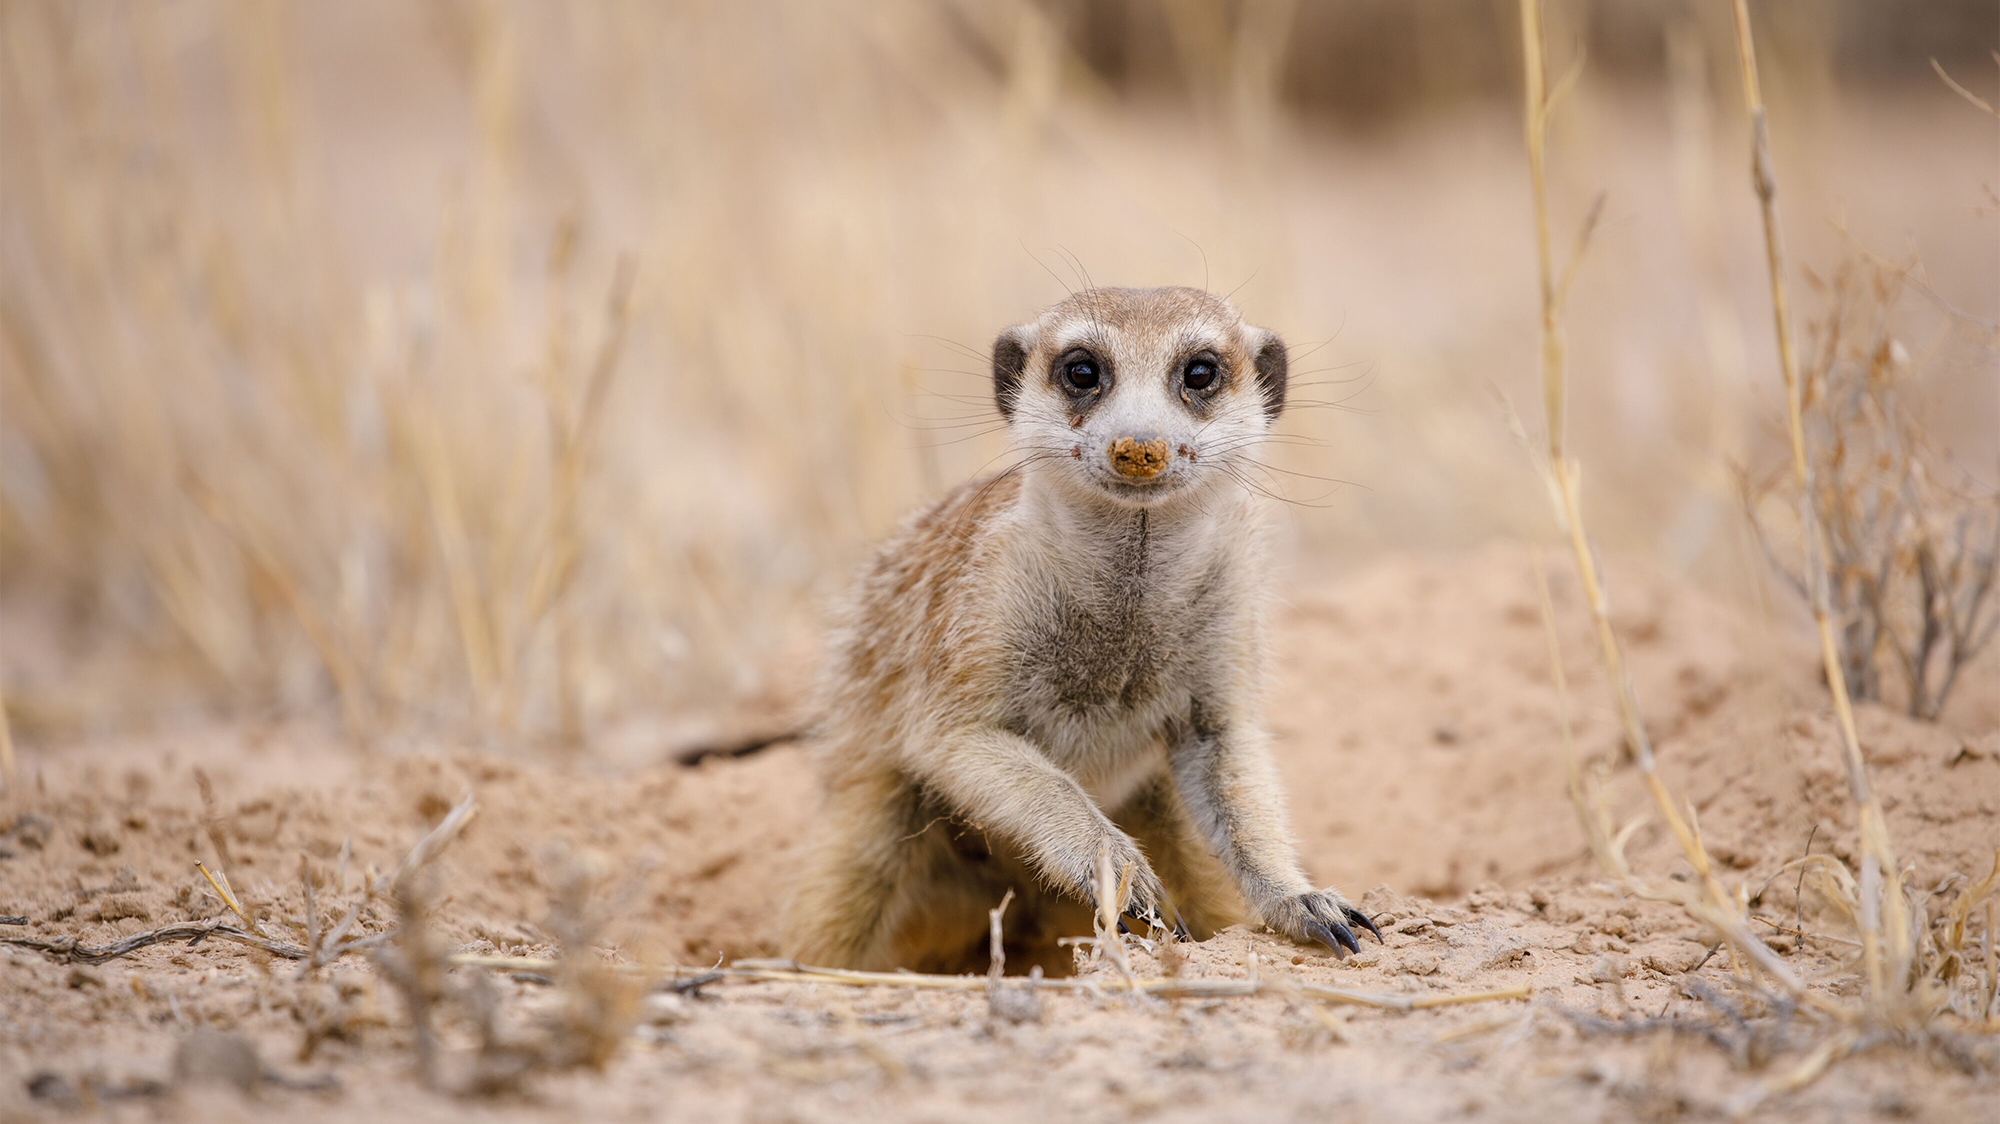 The Kalahari Meerkat Project collected detailed monthly life-history data between 1997 and 2016.